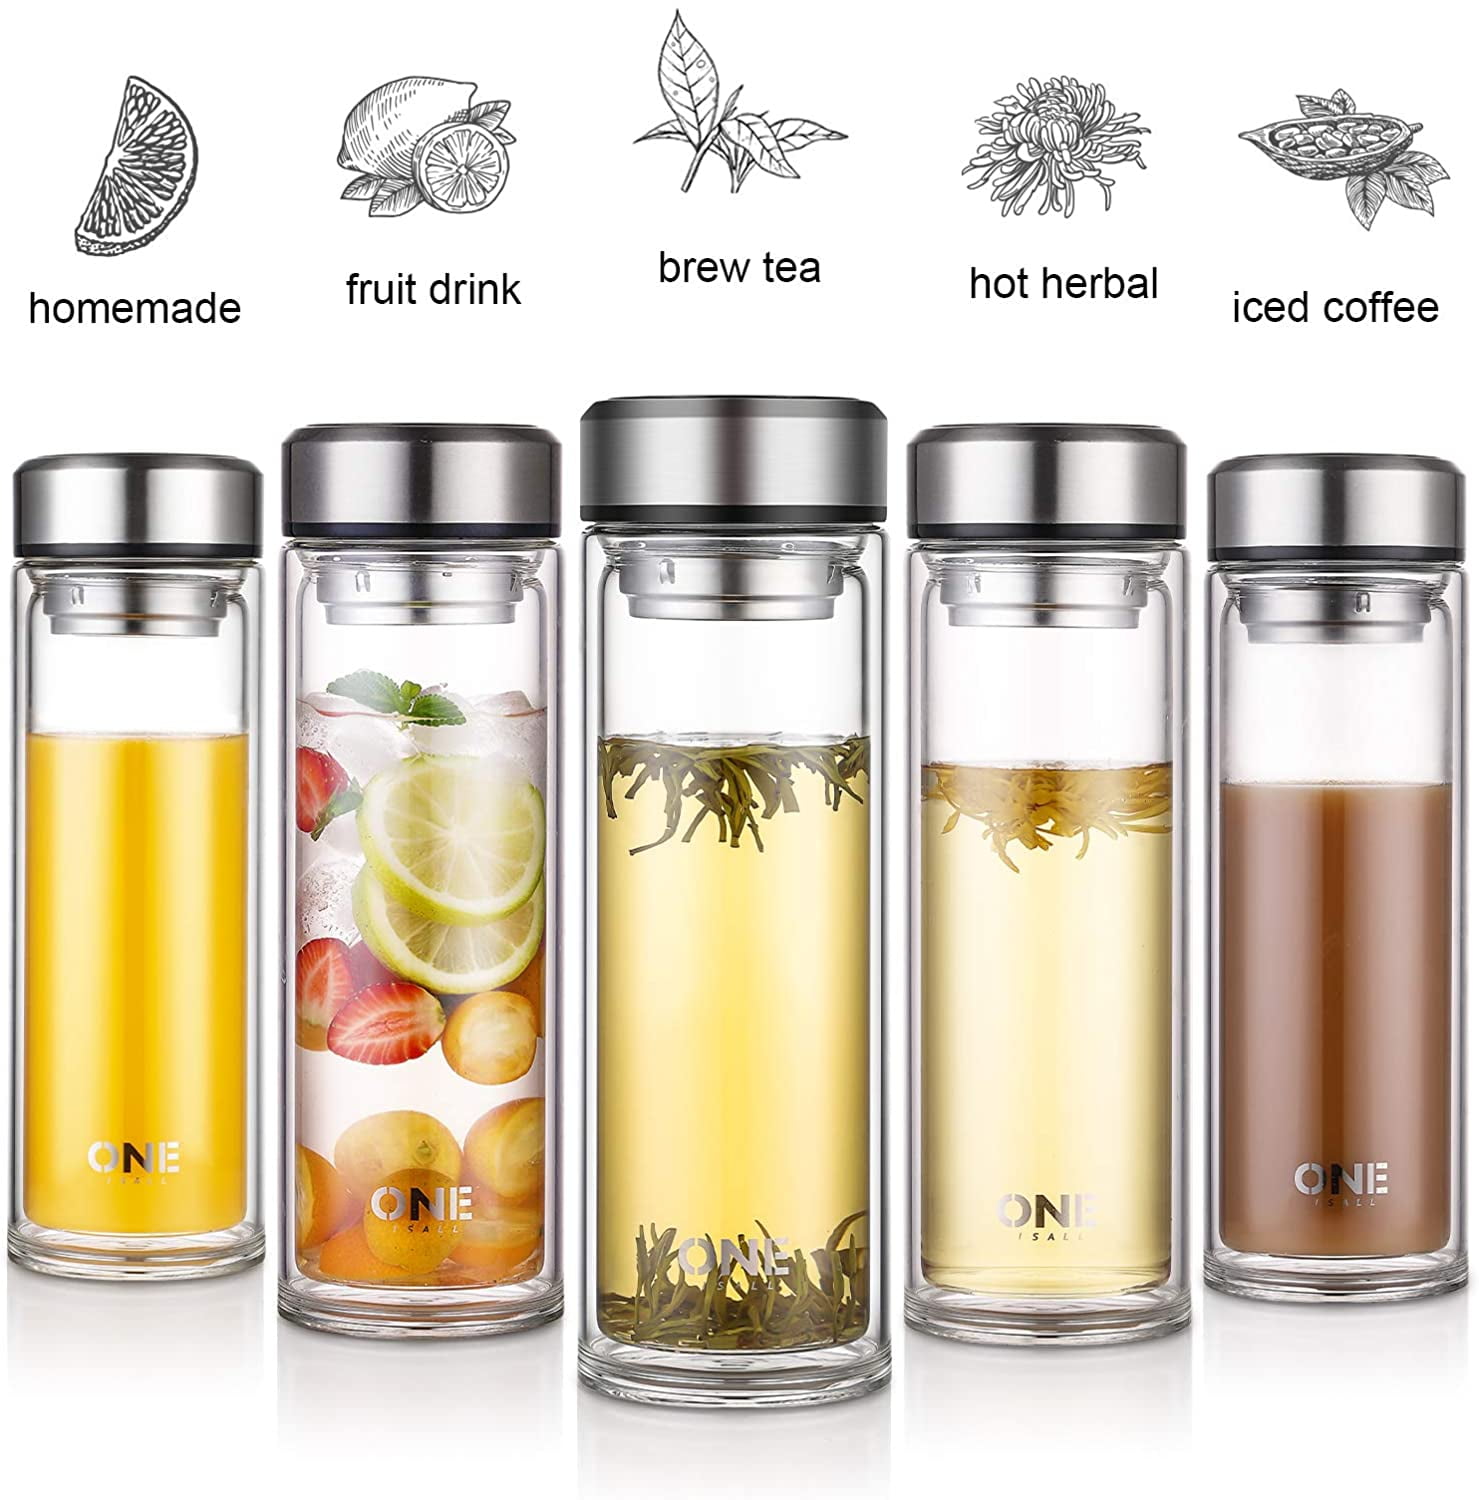 Oneisall Glass Tea Infuser - 7oz Travel Mug with Strainer, Tea Tumbler Bottle for Loose Leaf Tea, Fruit and Cold Brew Coffee (Brown)